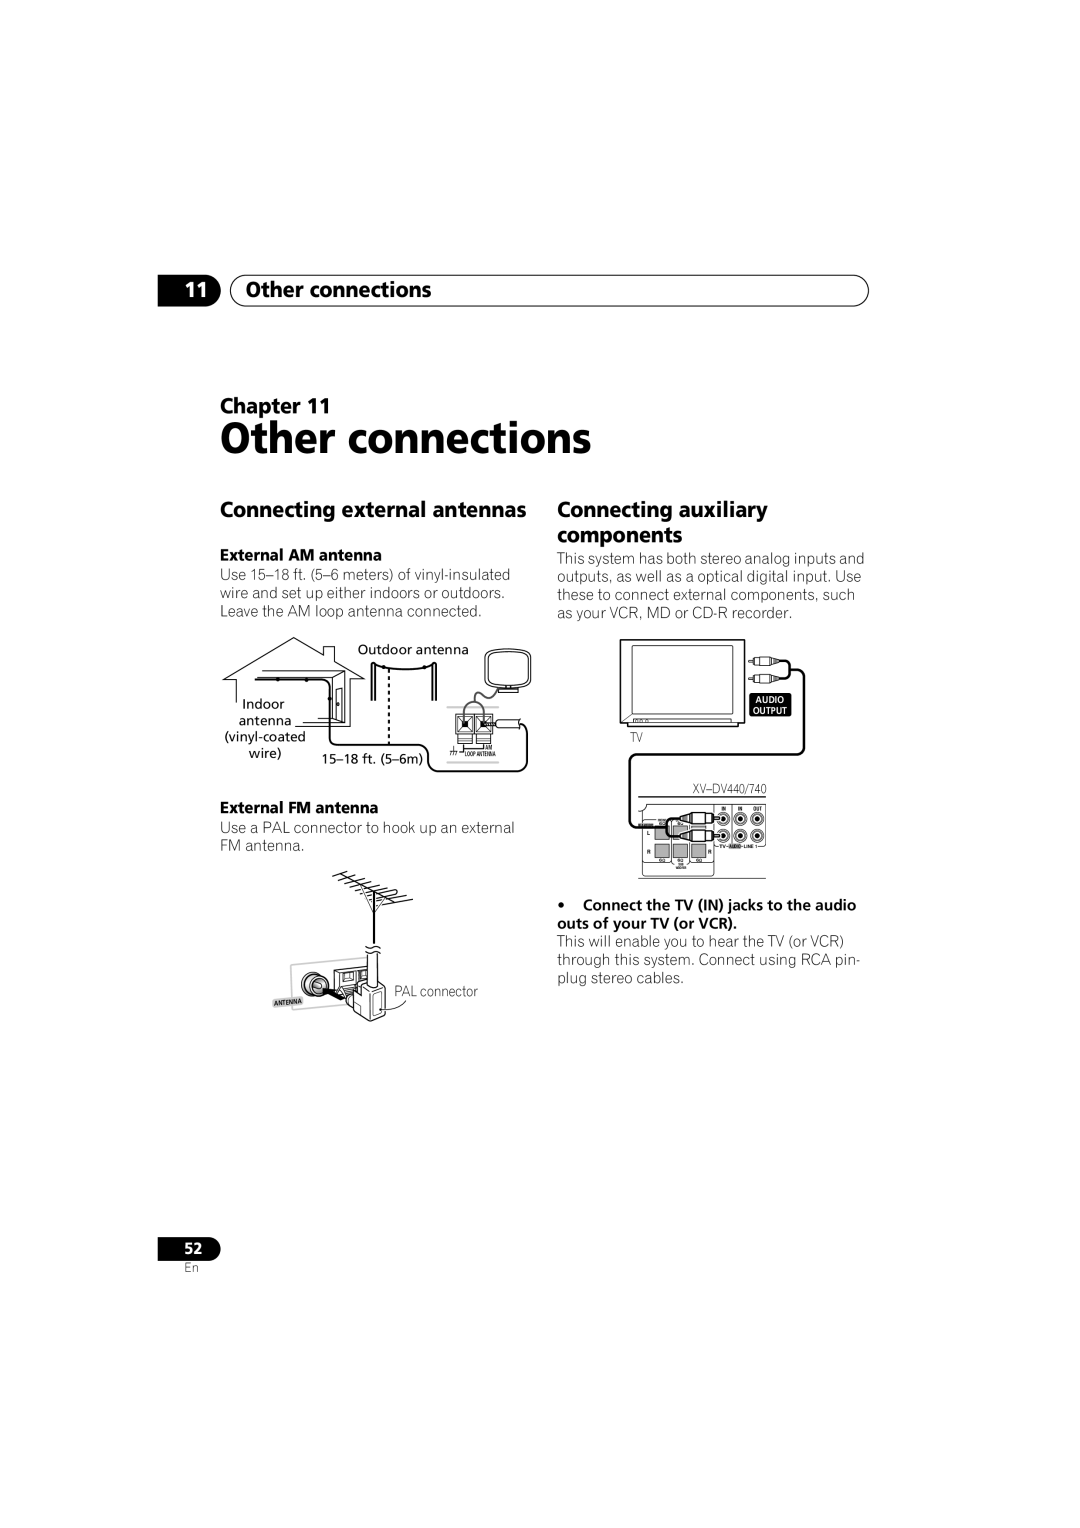 Pioneer XV-DV440, S-DV440 Other connections Chapter, Connecting external antennas, Connecting auxiliary components 